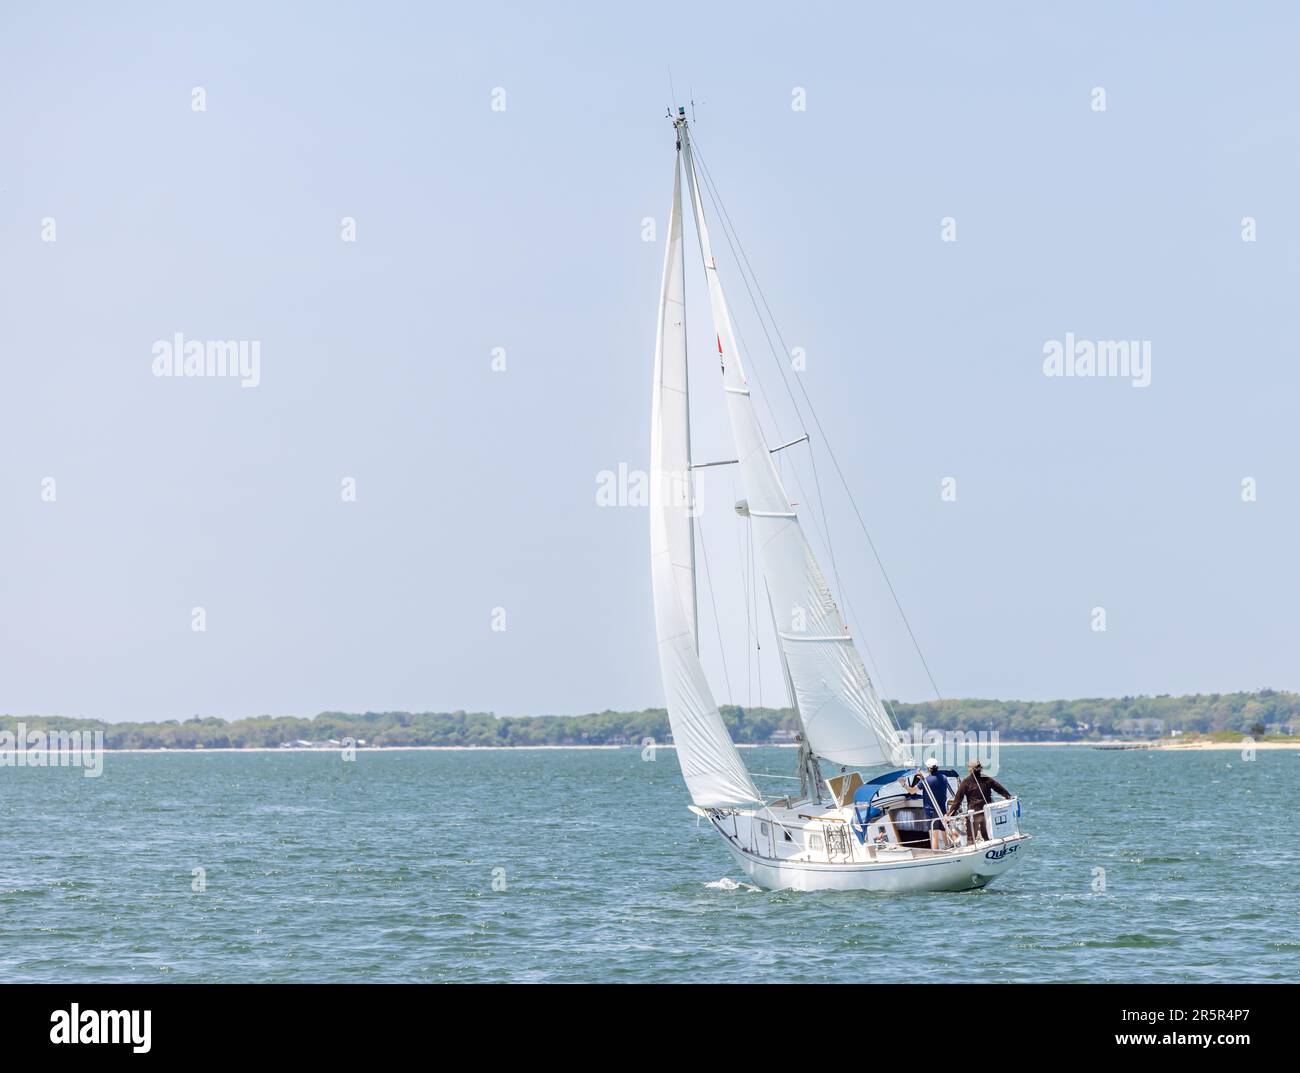 Sail boat, quest under sail off shelter island, ny Stock Photo